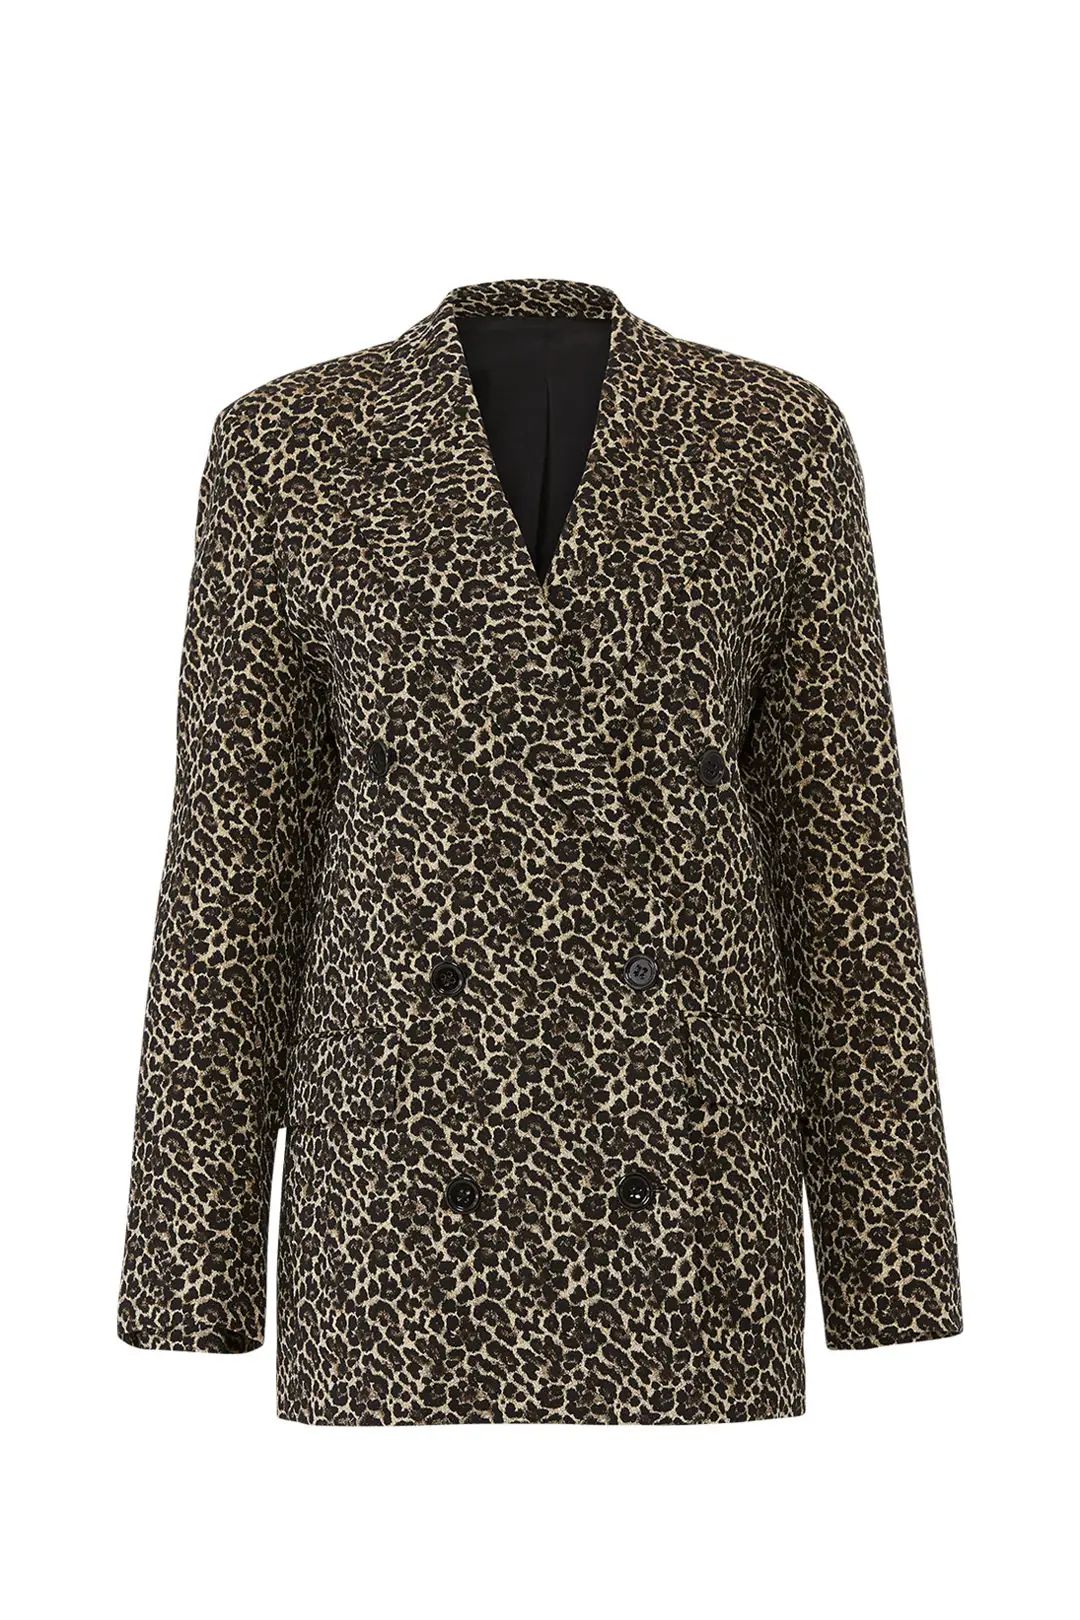 The Kooples Leopard Double Breasted Blazer | Rent The Runway